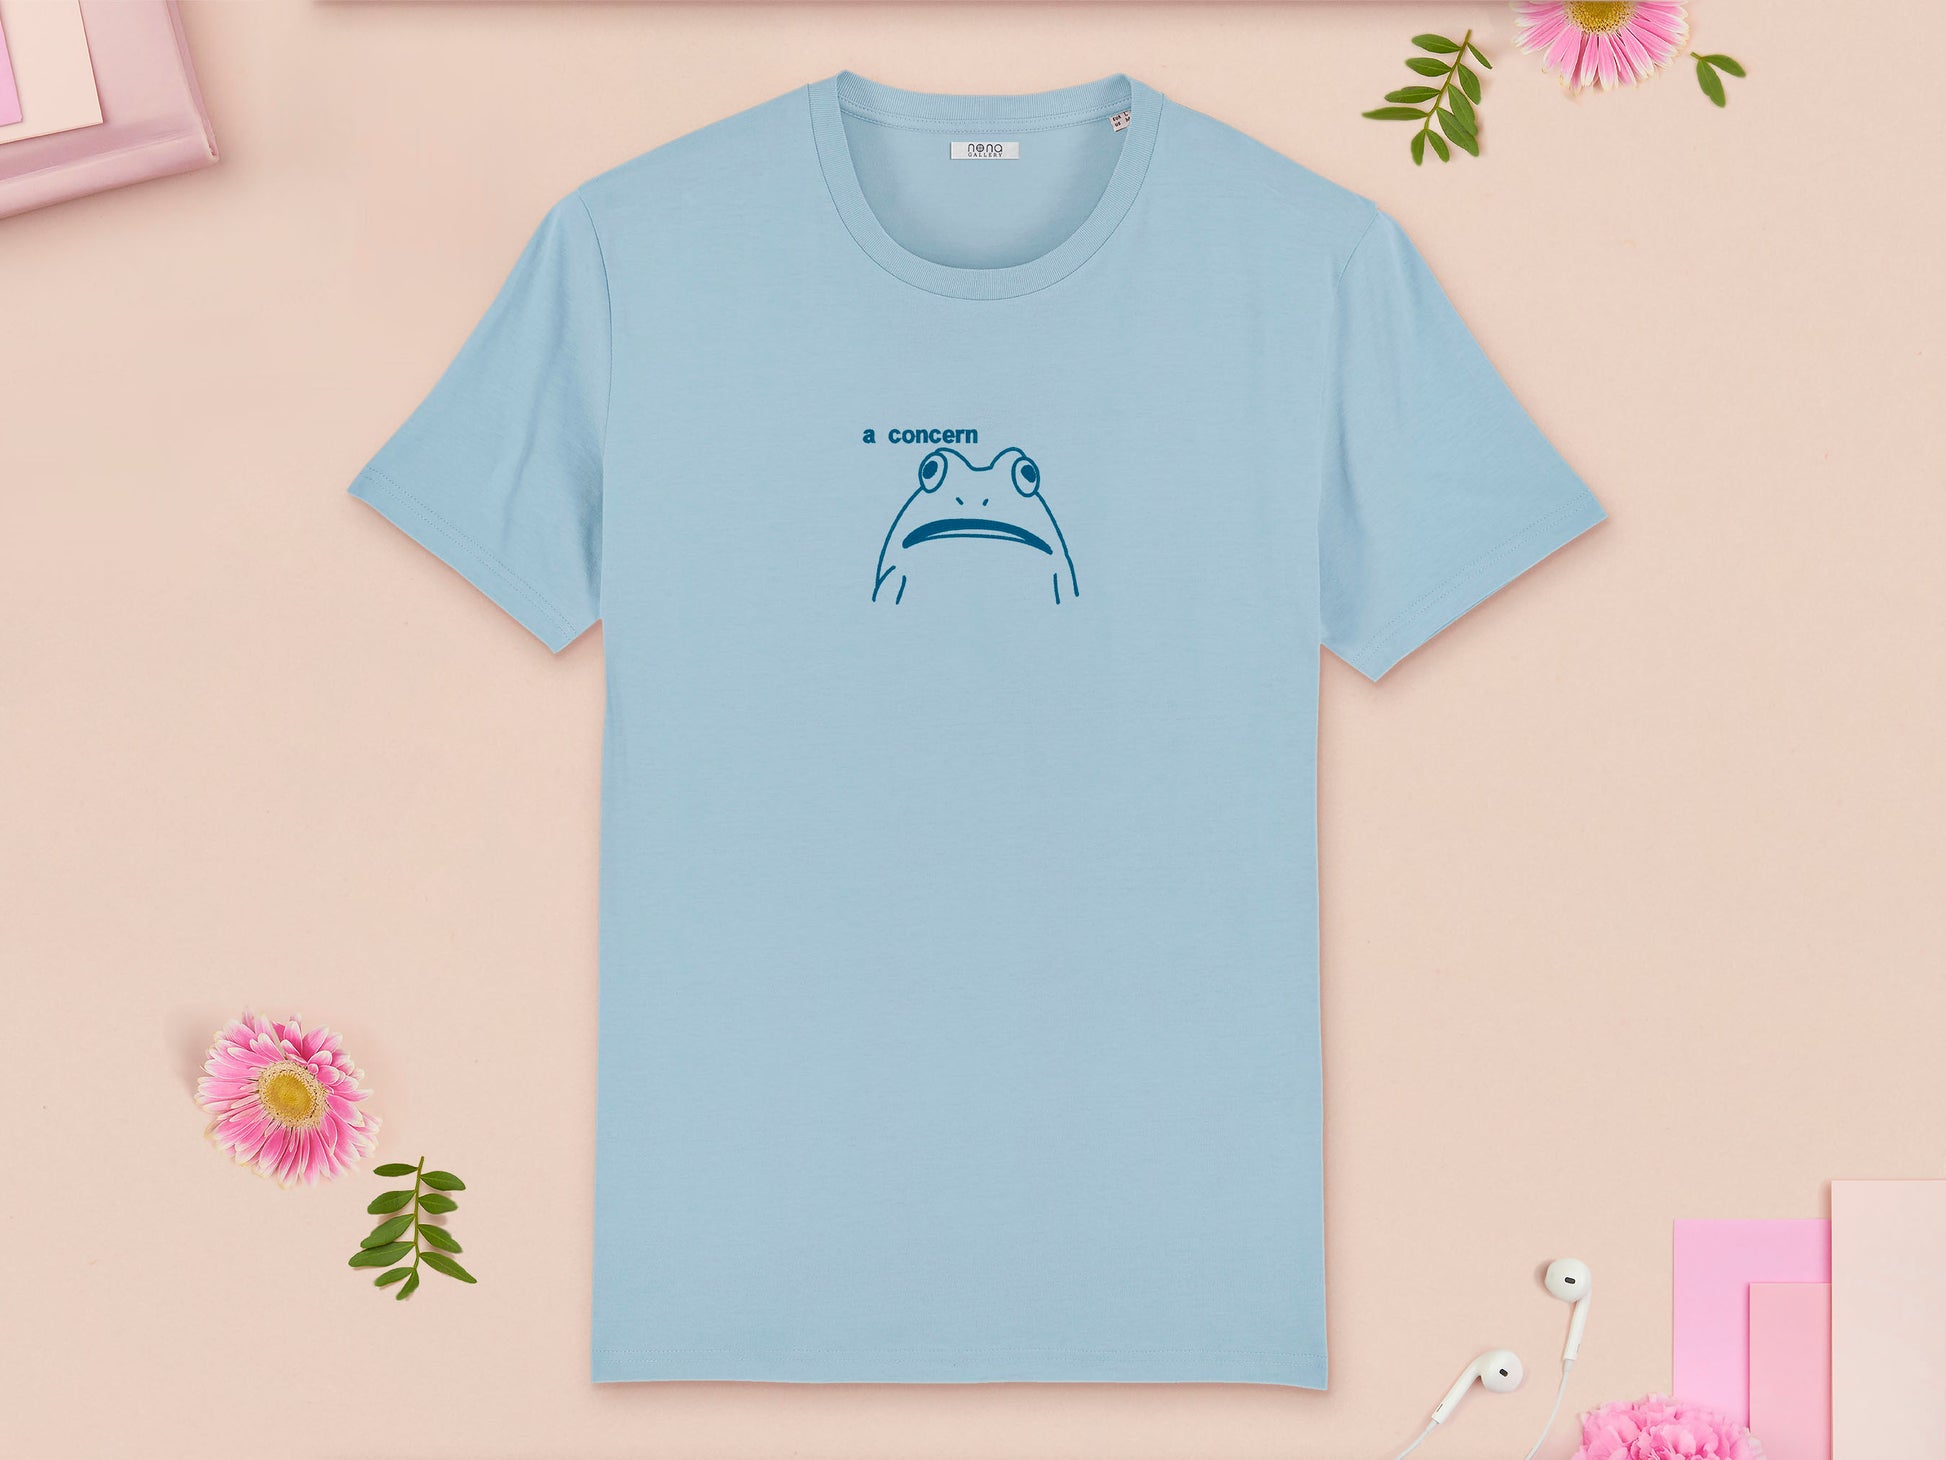 A blue crew neck short sleeve t-shirt, with an embroidered blue thread design of cute confused looking frog with the text a concern.